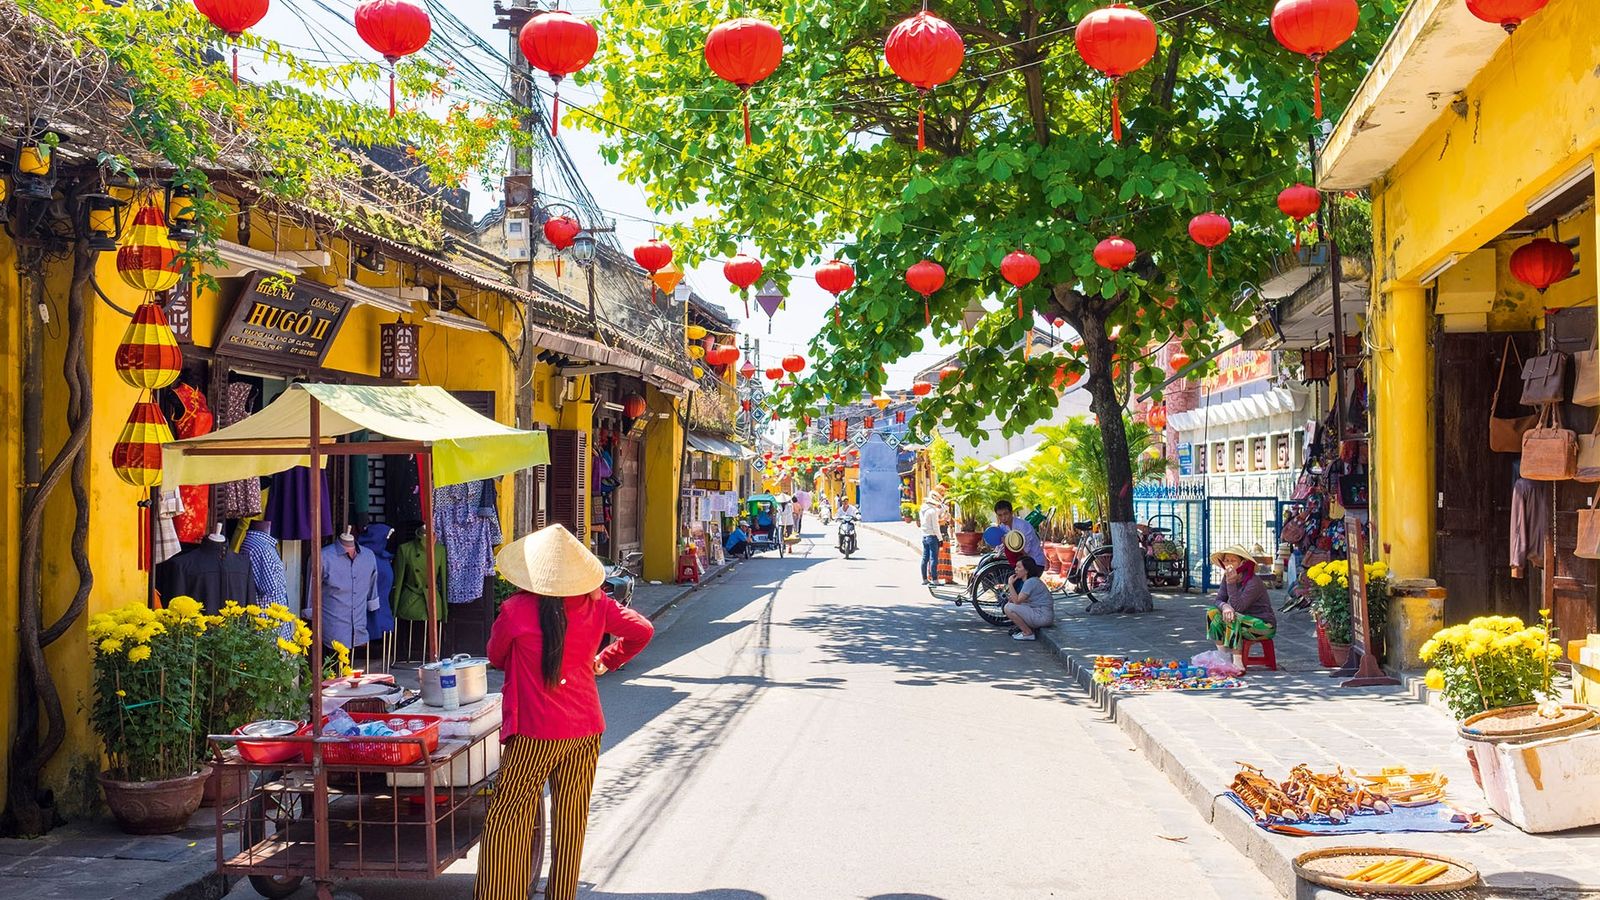 Things to do in one day in Hoi An